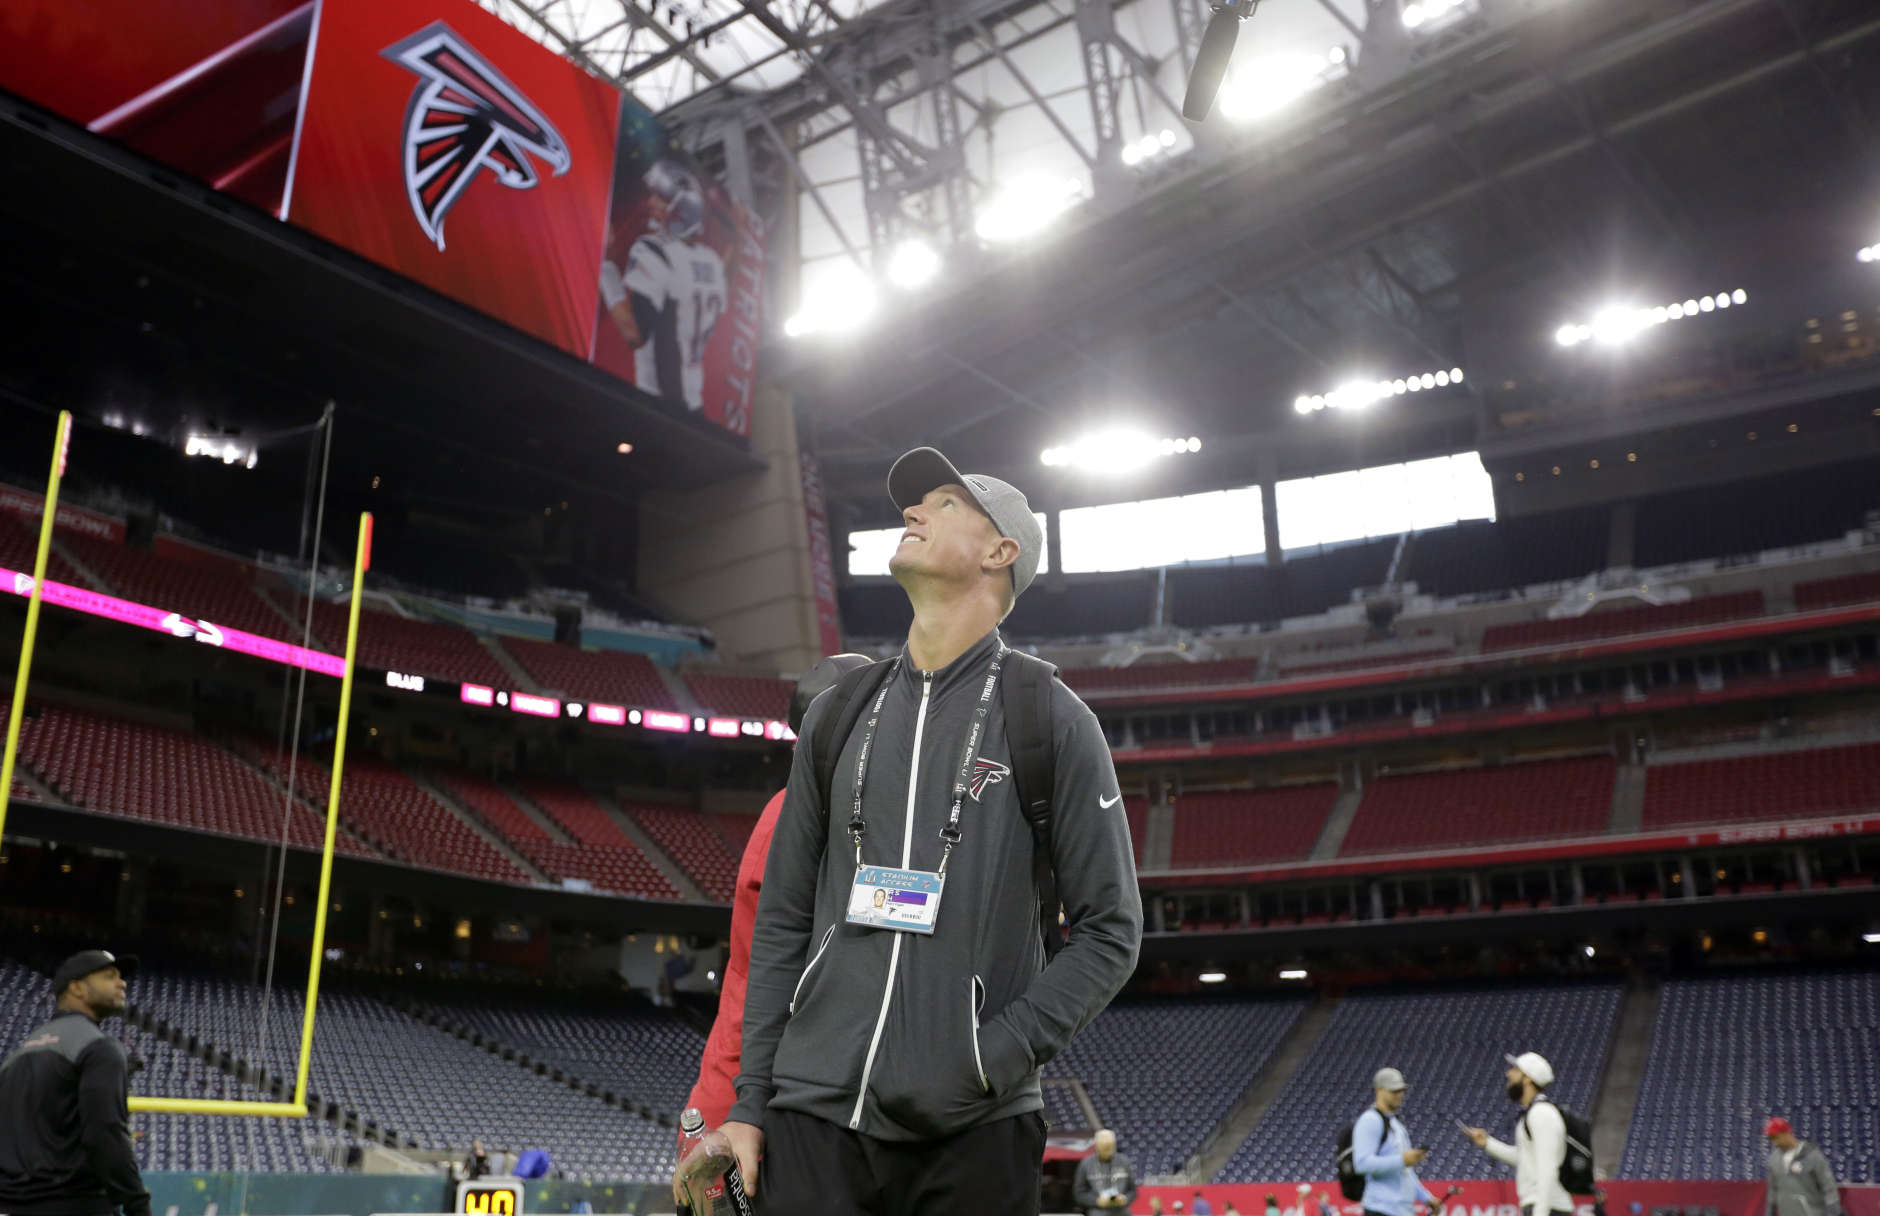 Atlanta Falcons quarterback Matt Ryan looks around the field during a walk through at NRG Stadium on the eve of NFL Super Bowl 51 football game Saturday, Feb. 4, 2017, in Houston. Atlanta will face the New England Patriots in the Super Bowl Sunday. (AP Photo/Eric Gay)